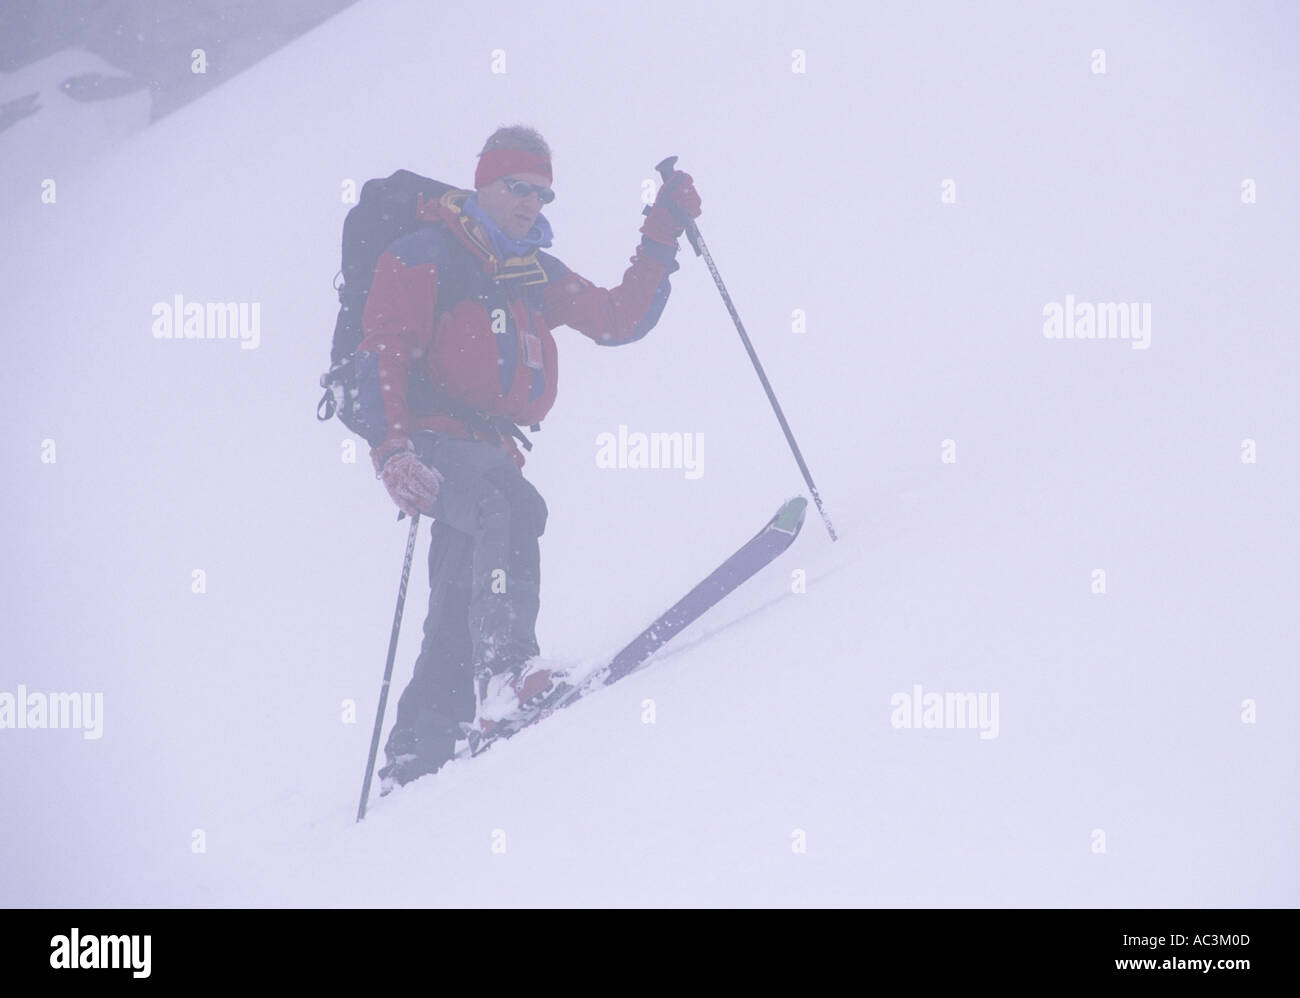 Climbing up a slope on skis in the Bedretto, Switzerland, Italy Stock Photo